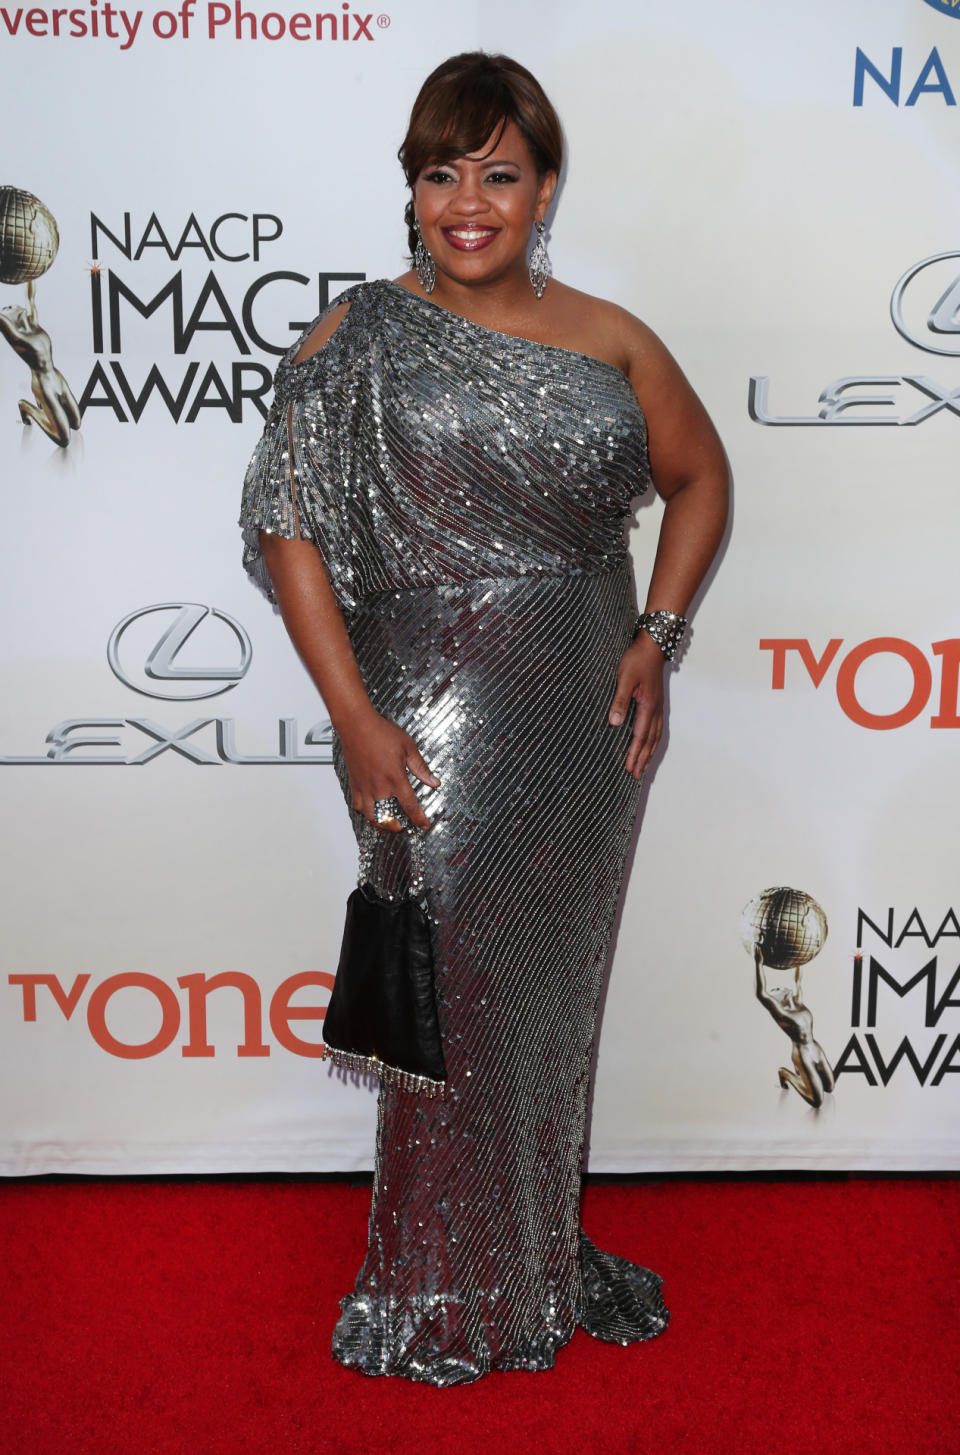 Chandra Wilson at the 46th Annual NAACP Image Awards